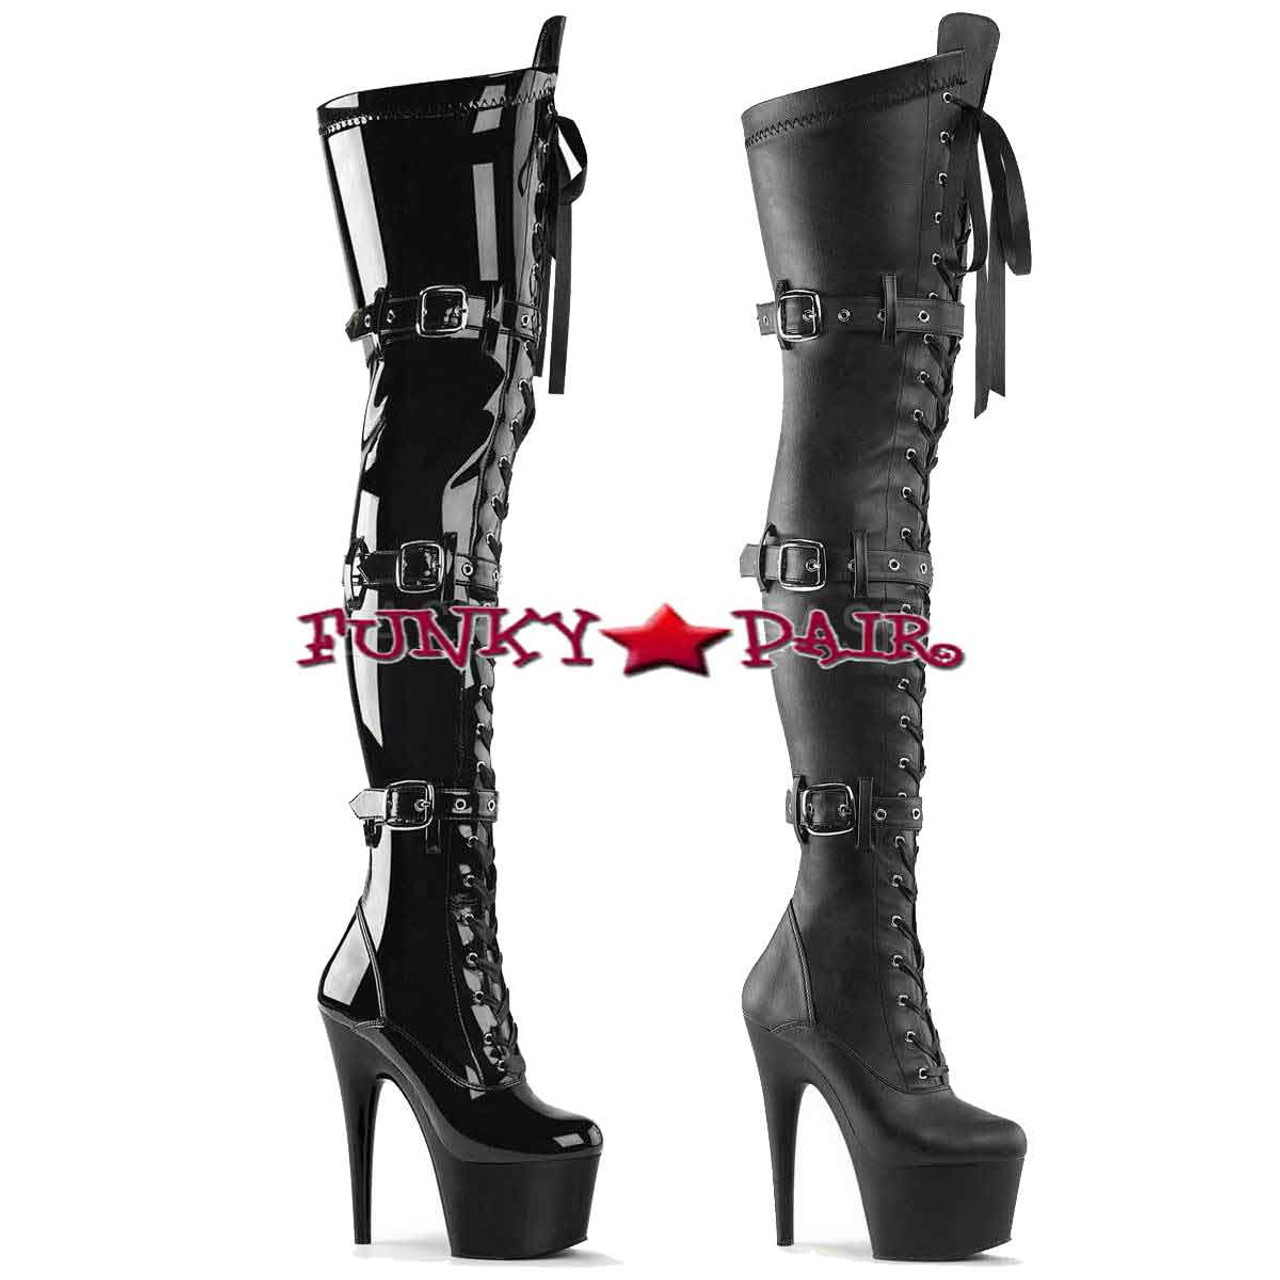 thigh high leather boots with buckles